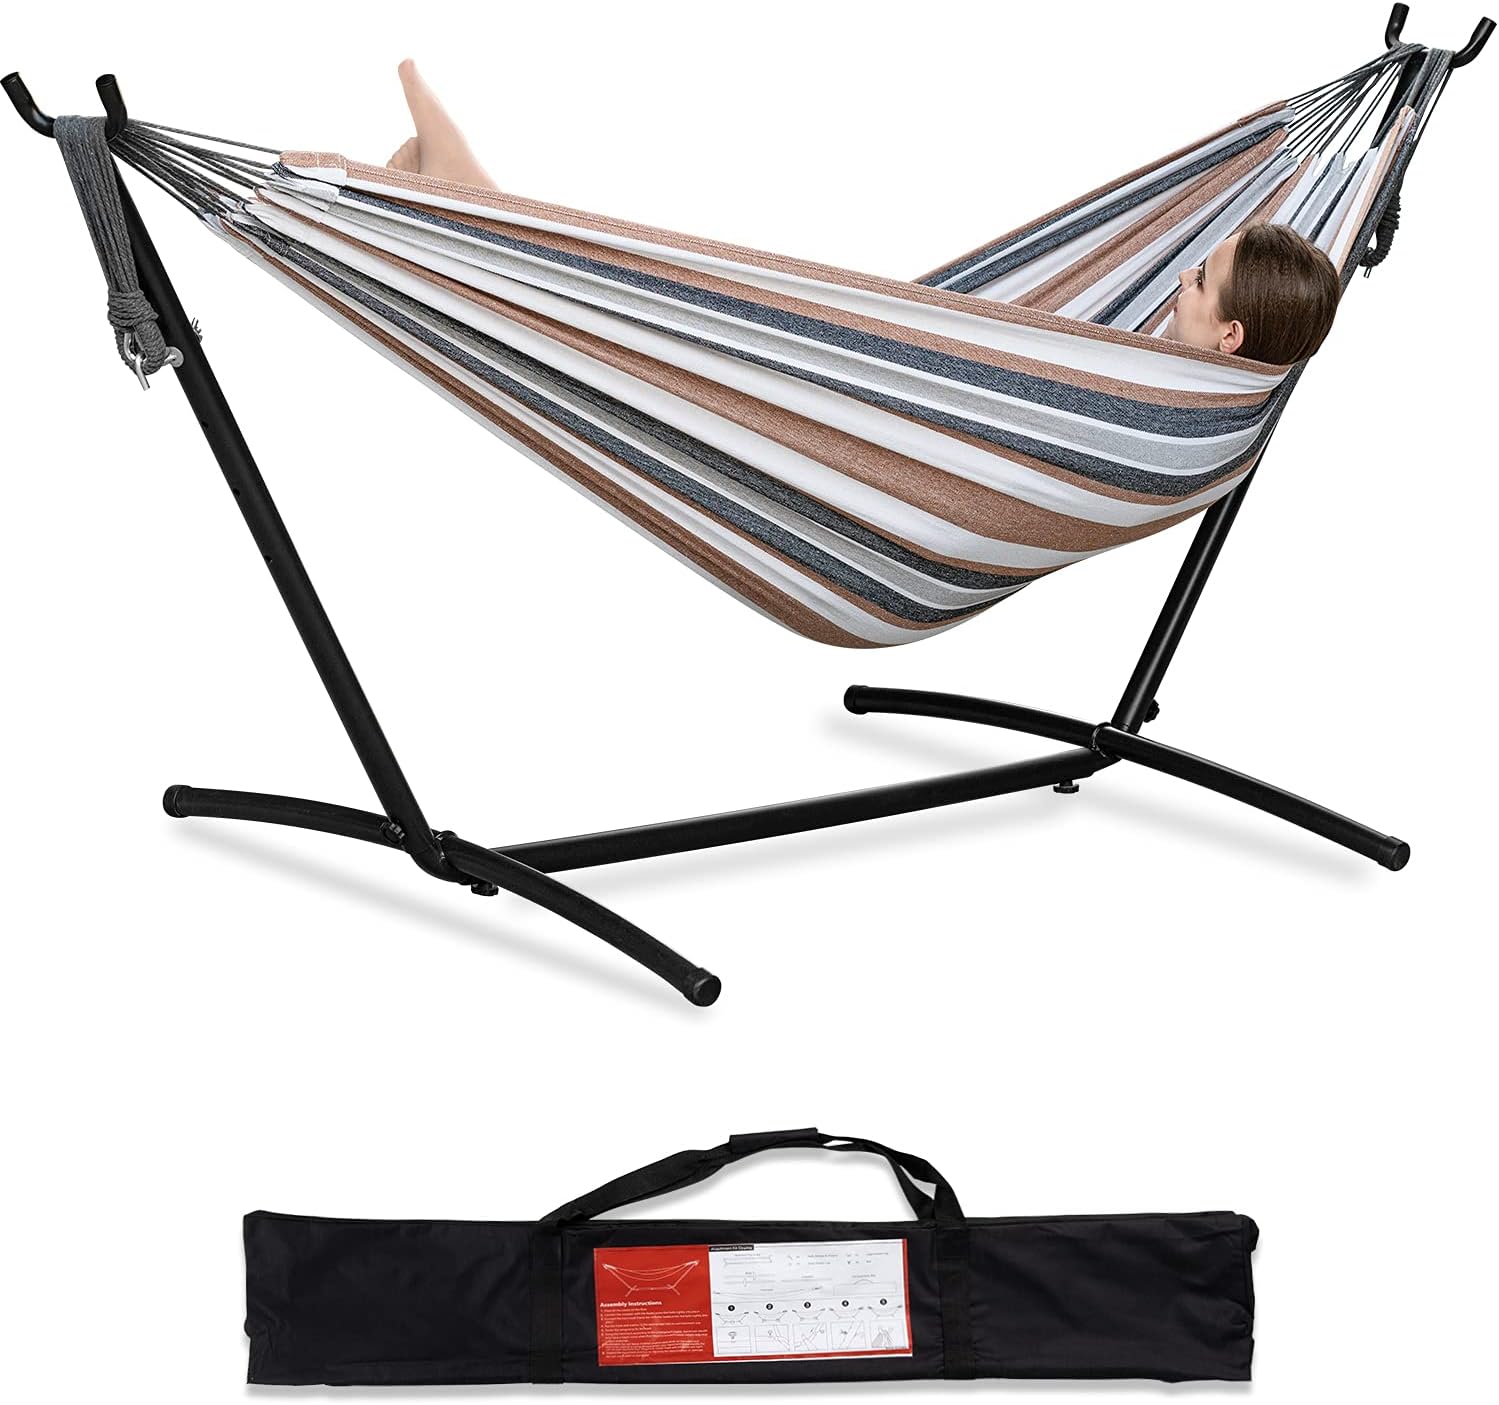 PNAEUT Double Hammock with Space Saving Steel Stand [...]